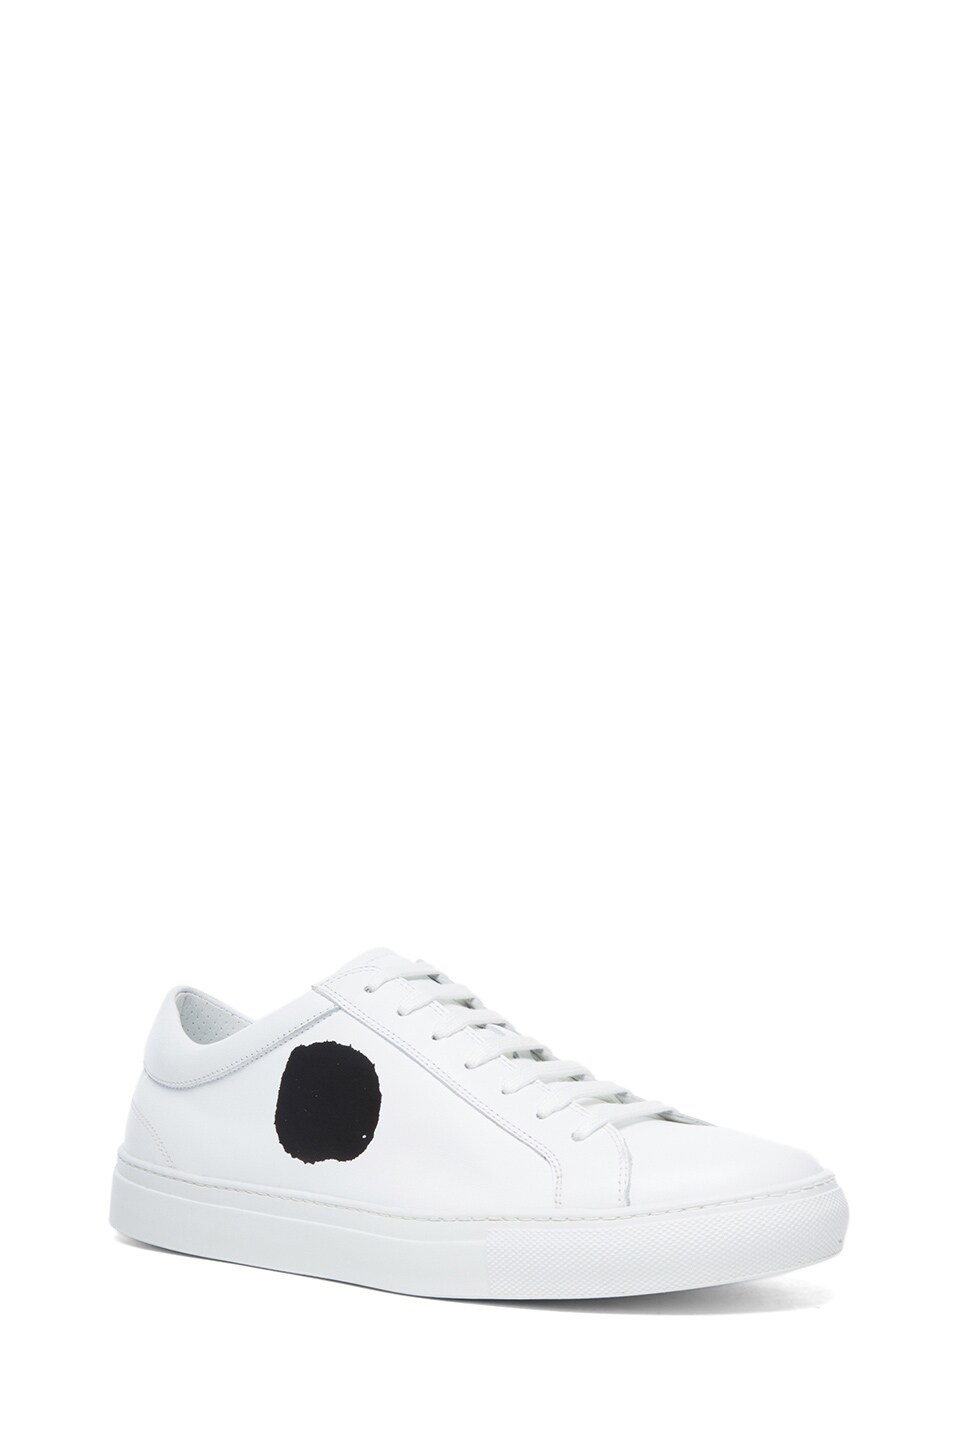 Image 1 of COMME des GARCONS SHIRT Dot Cow Skin Leather Sneakers in White